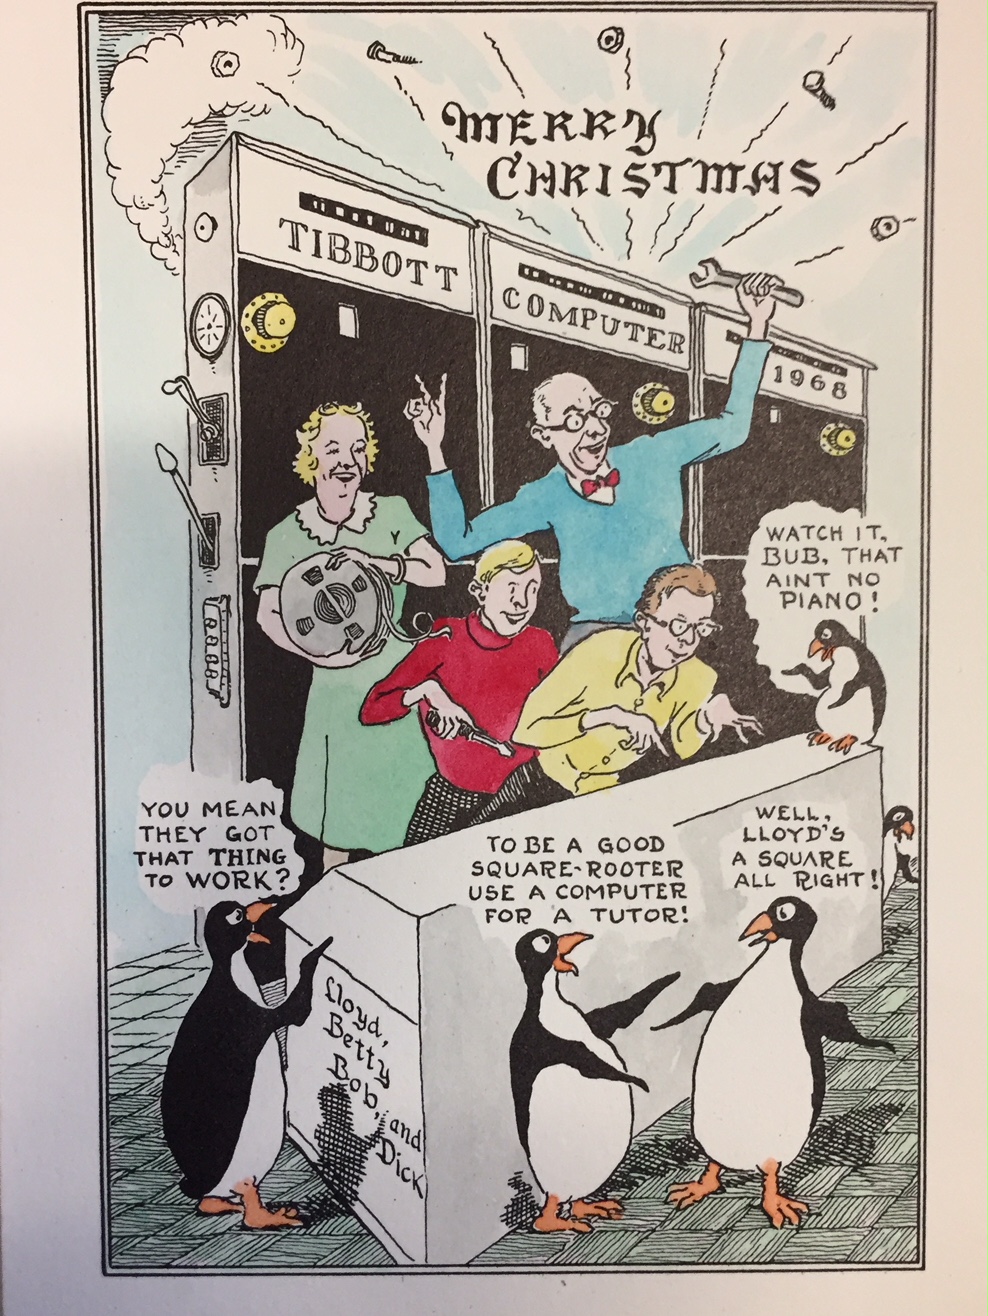 Seth's family Christmas card with penguins and drawn by his dad